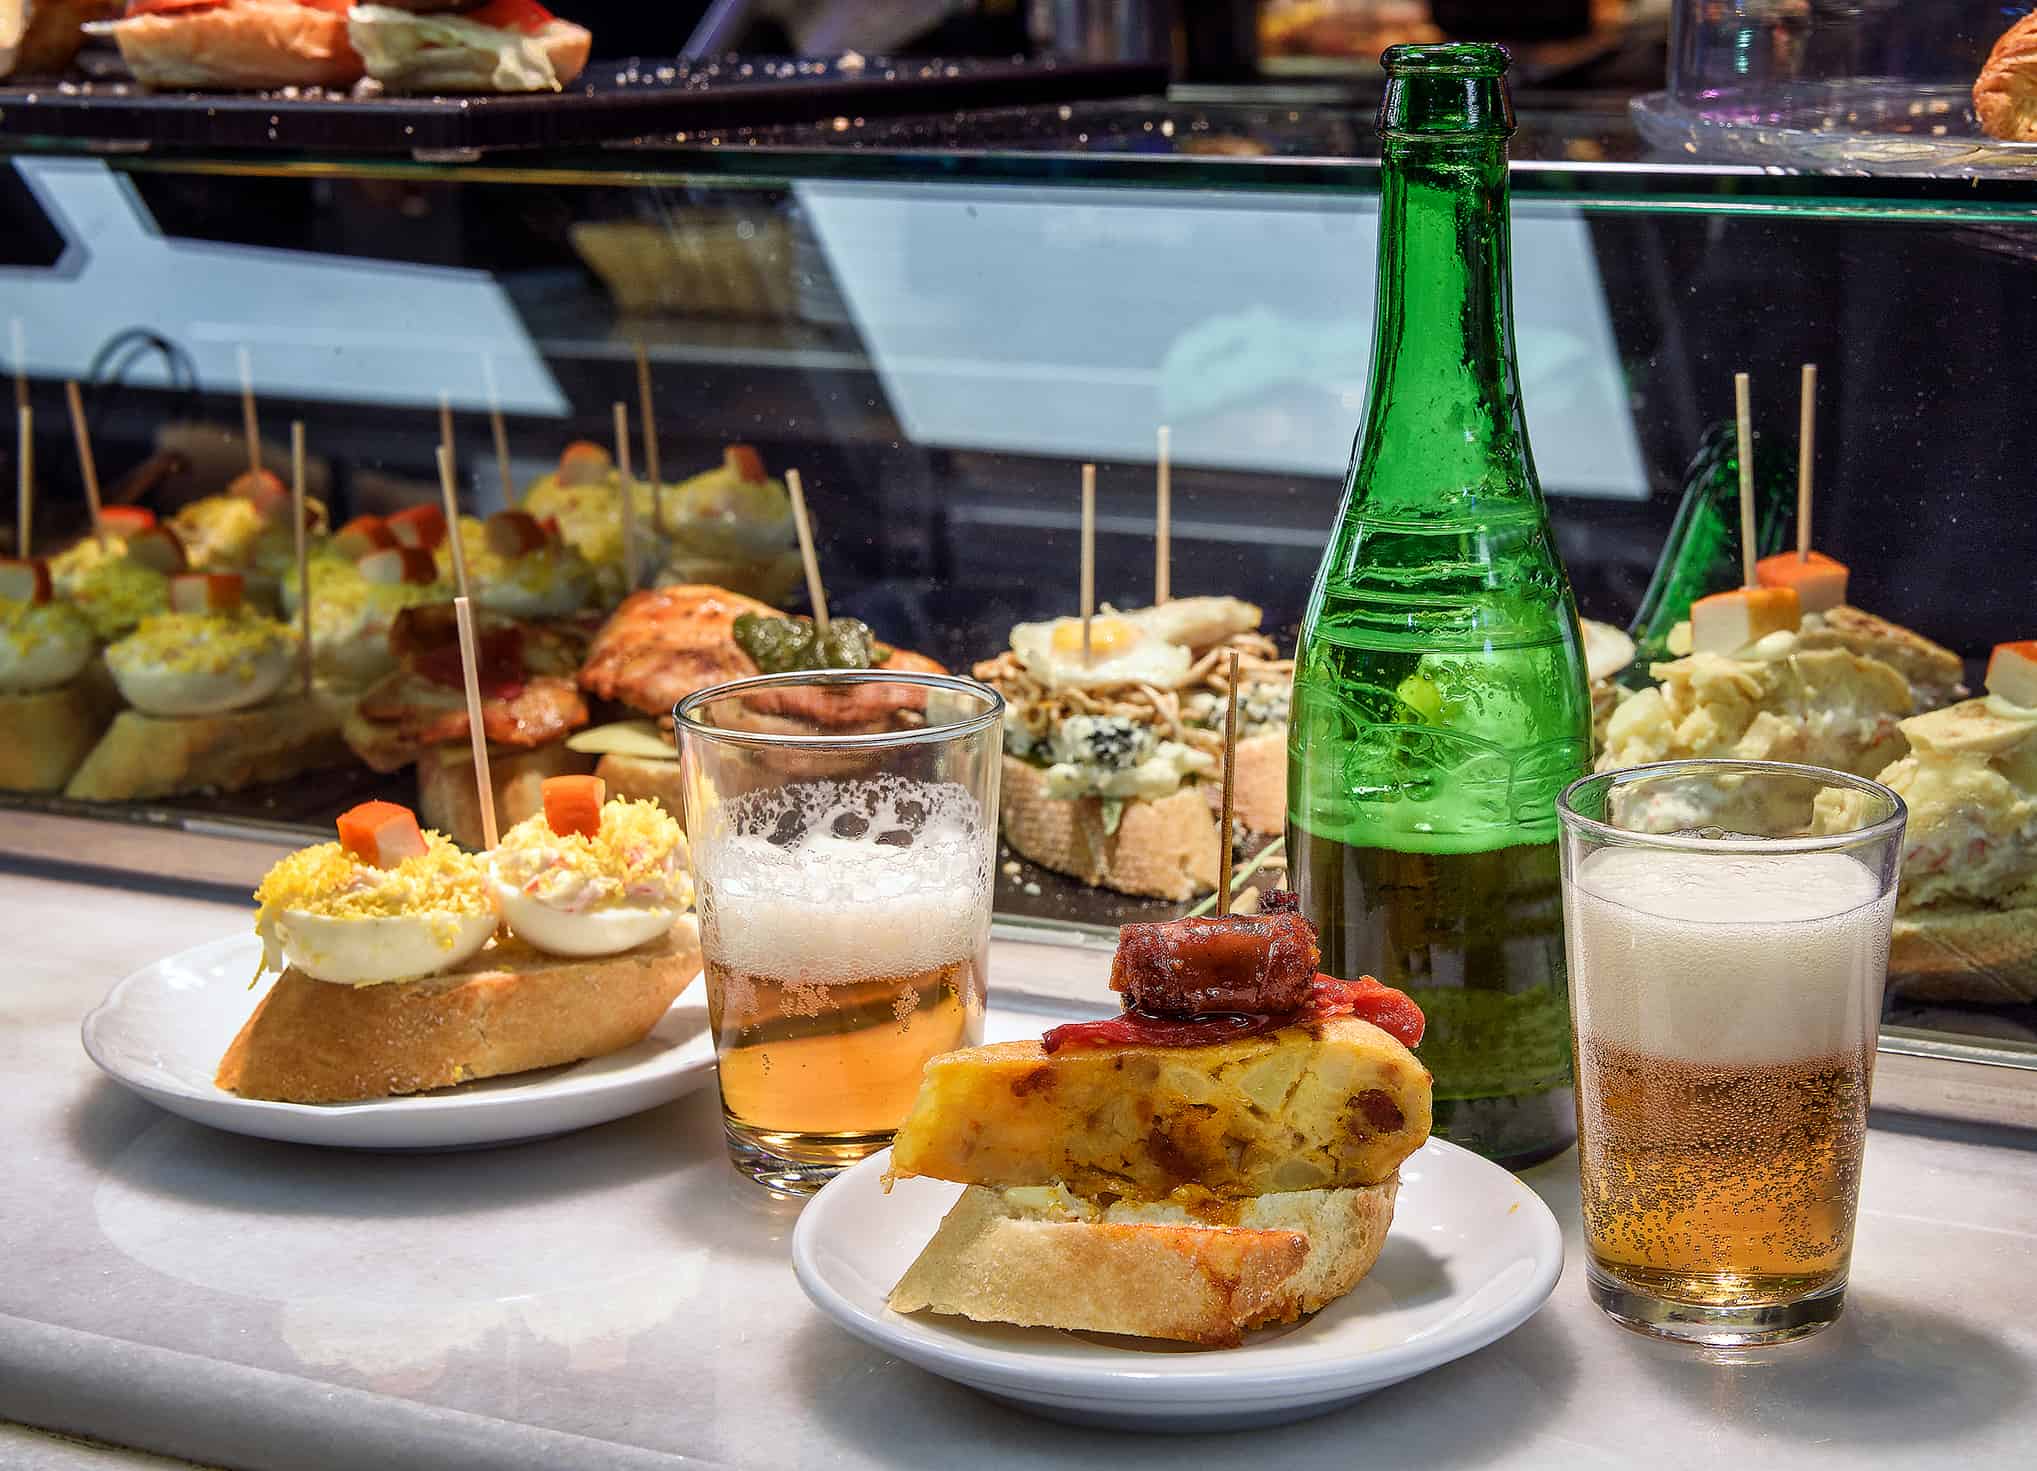 Bar counter with Spanish appetizers "pinchos" and beer